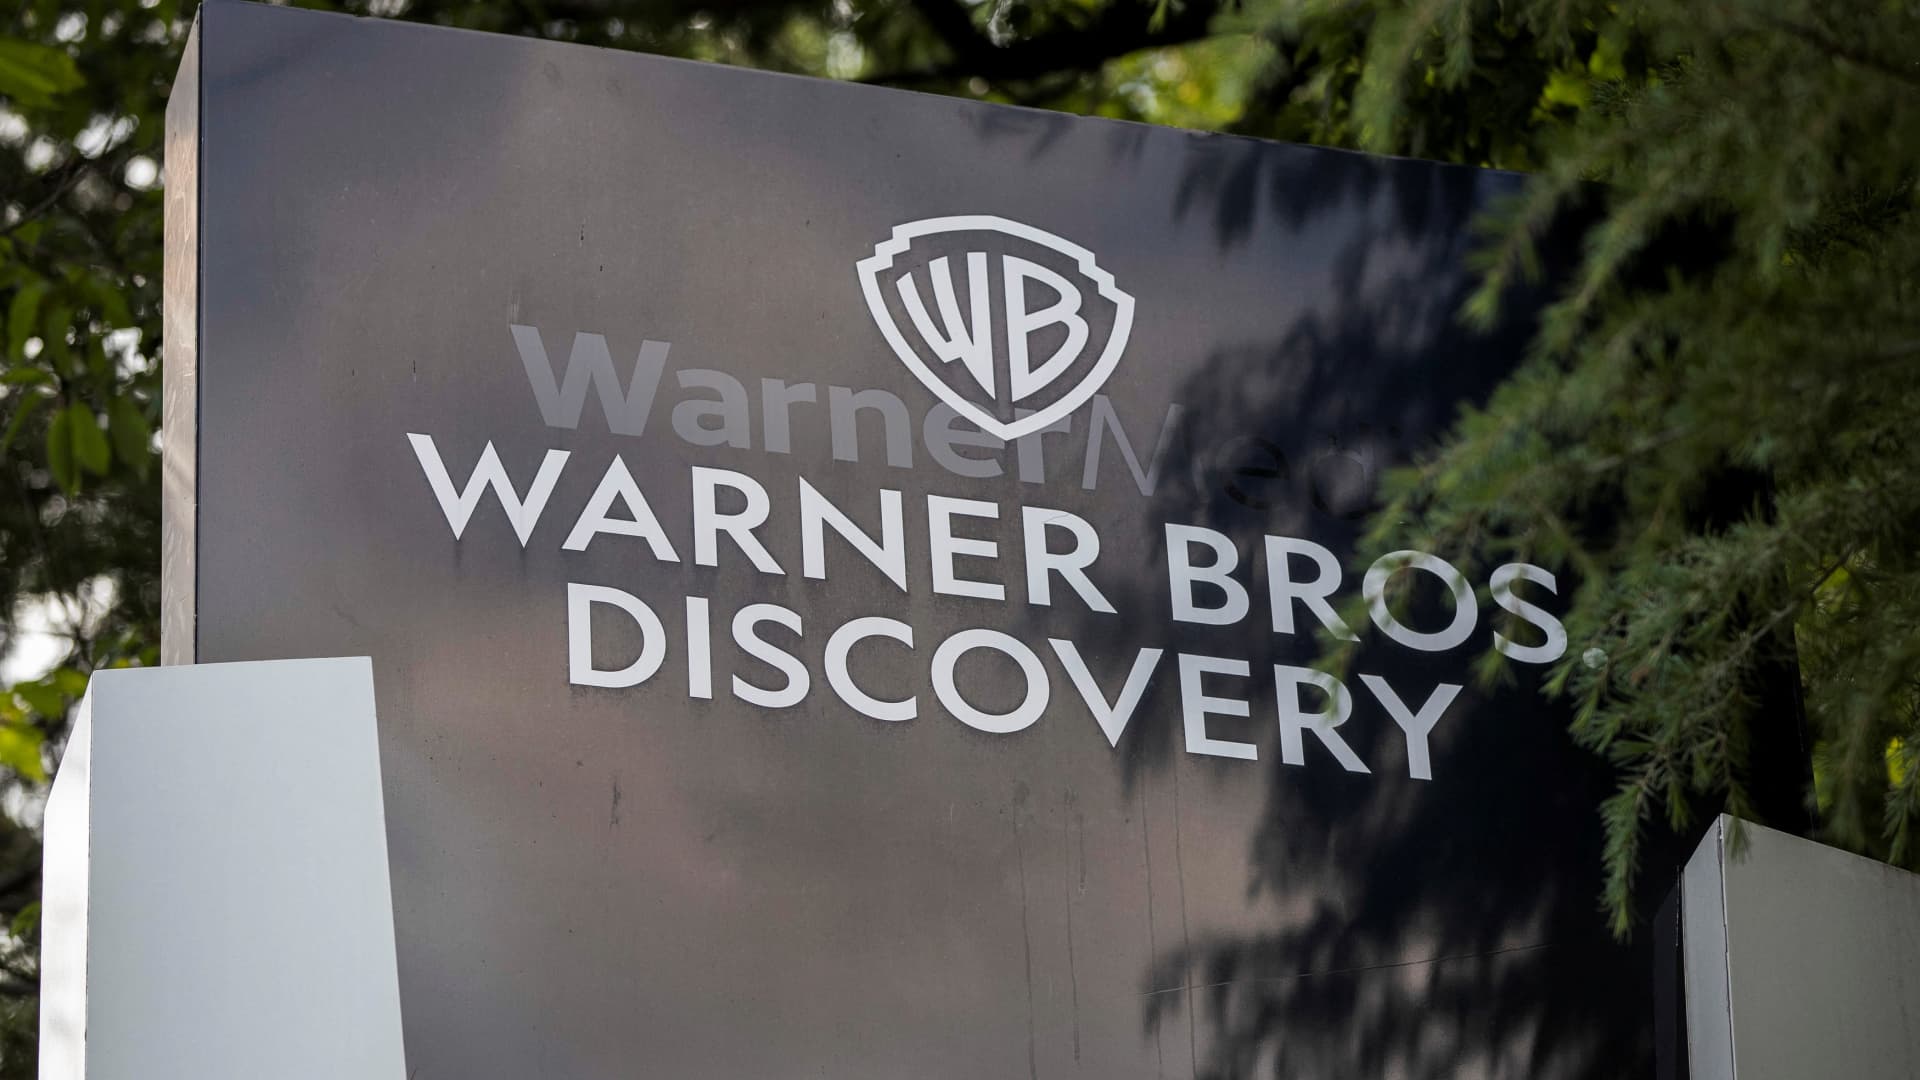 Stocks making the biggest moves midday: Warner Bros. Discovery, Rivian, Block, Live Nation and more